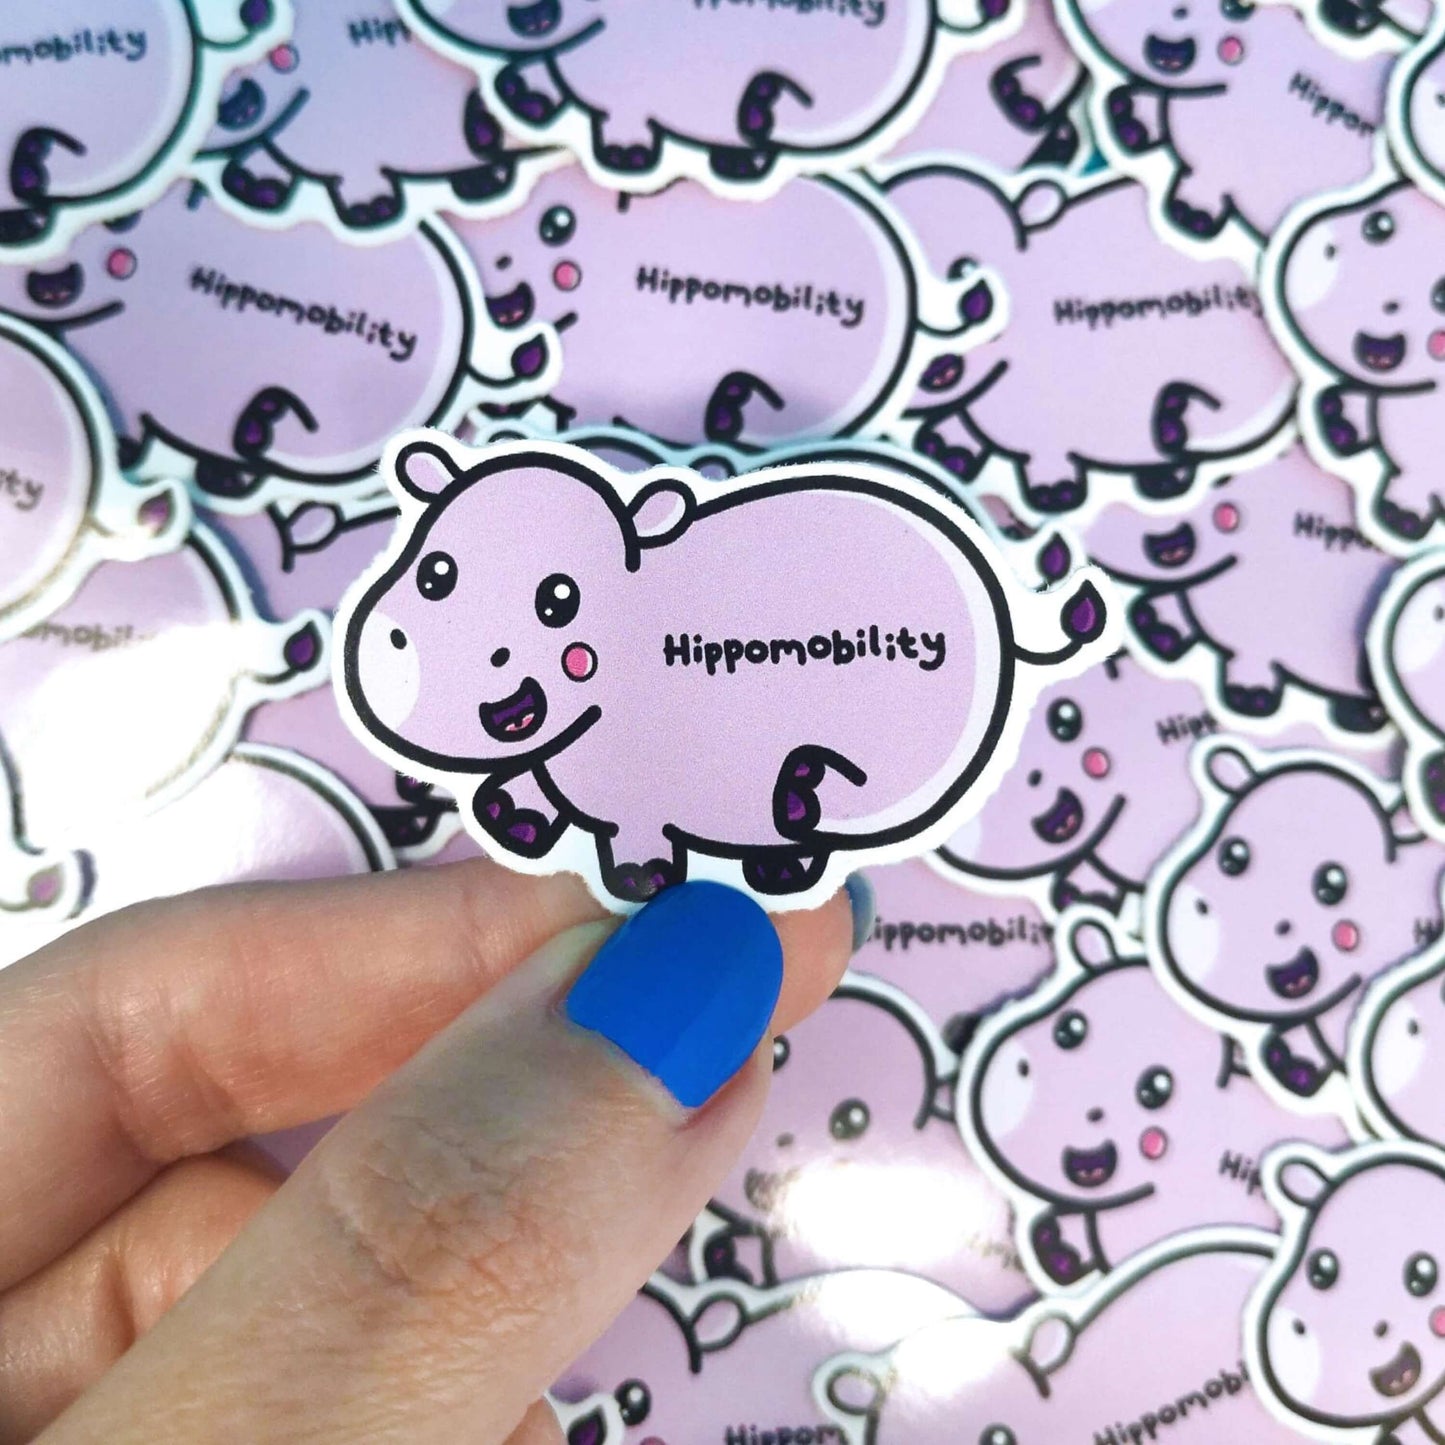 Hippomobility Sticker - Hyper Mobility held over other multiple copies of the same sticker. A cute smiling pastel purple hippo flicking its back leg up with black text reading 'hippomobility' across its body. The hand drawn design is raising awareness for hyper mobility and EDS.